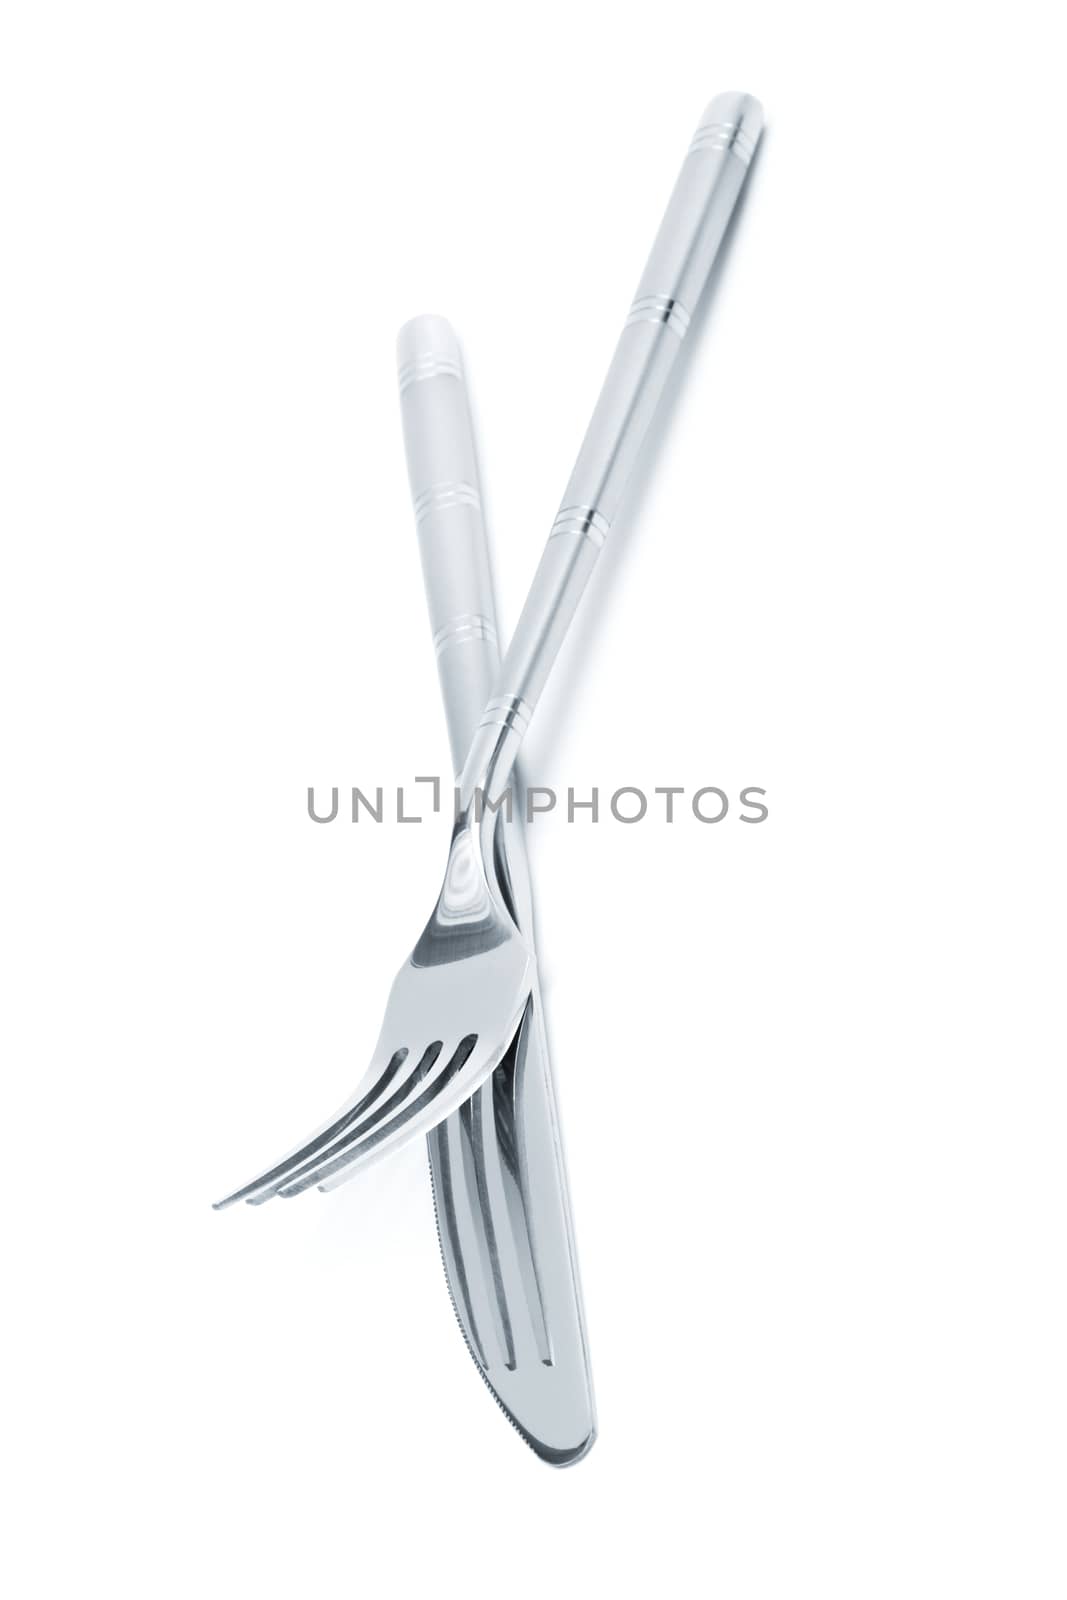 steel knife and fork by terex